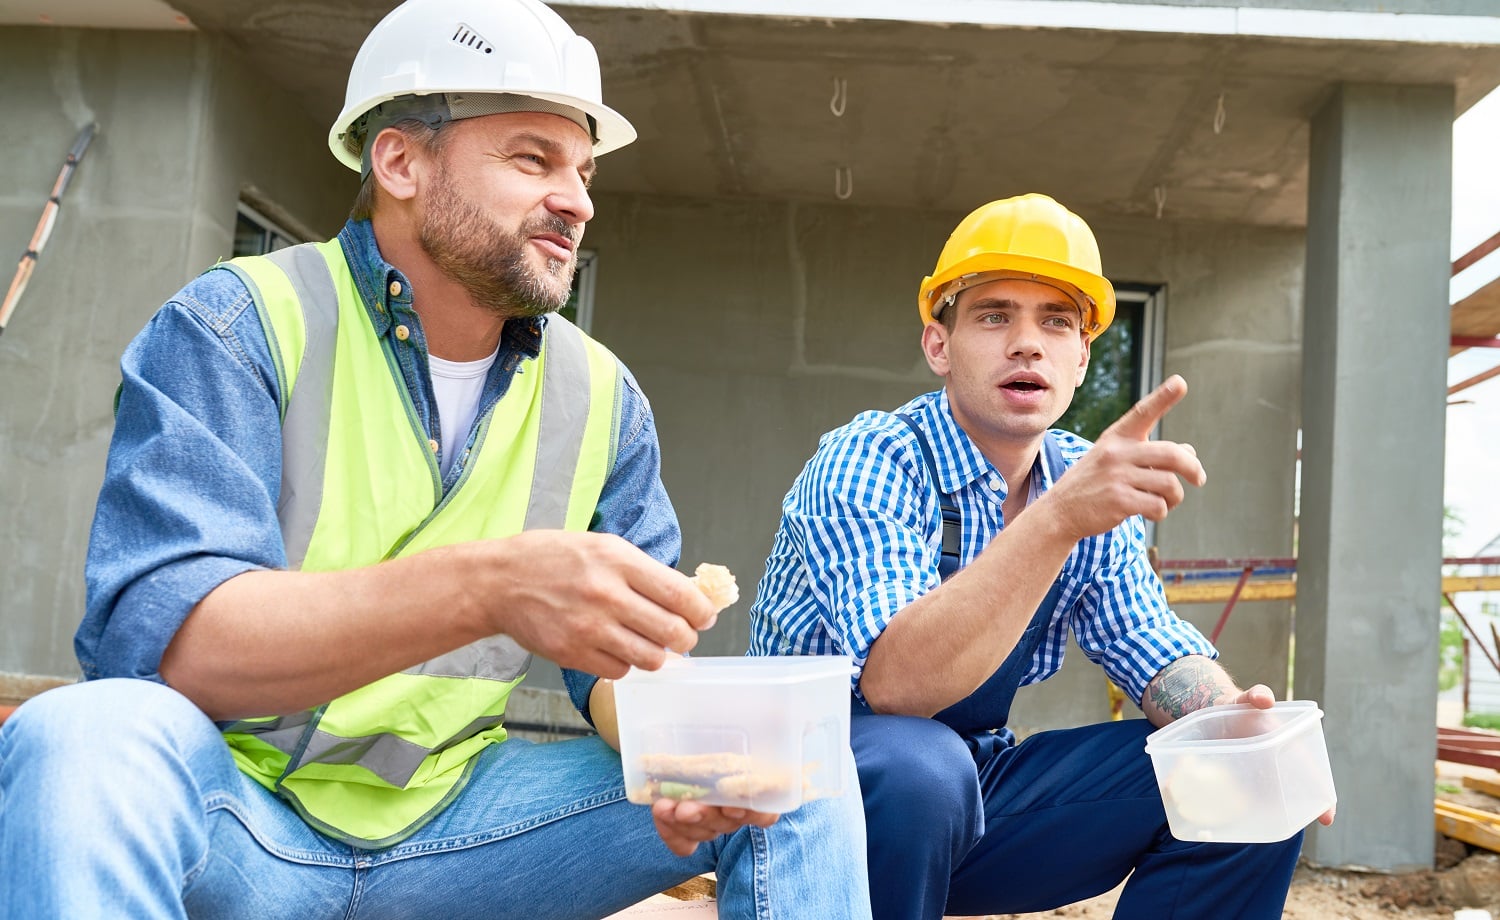 Portrait of two construction workers taking break on site eating lunch out of plastic containers outdoors